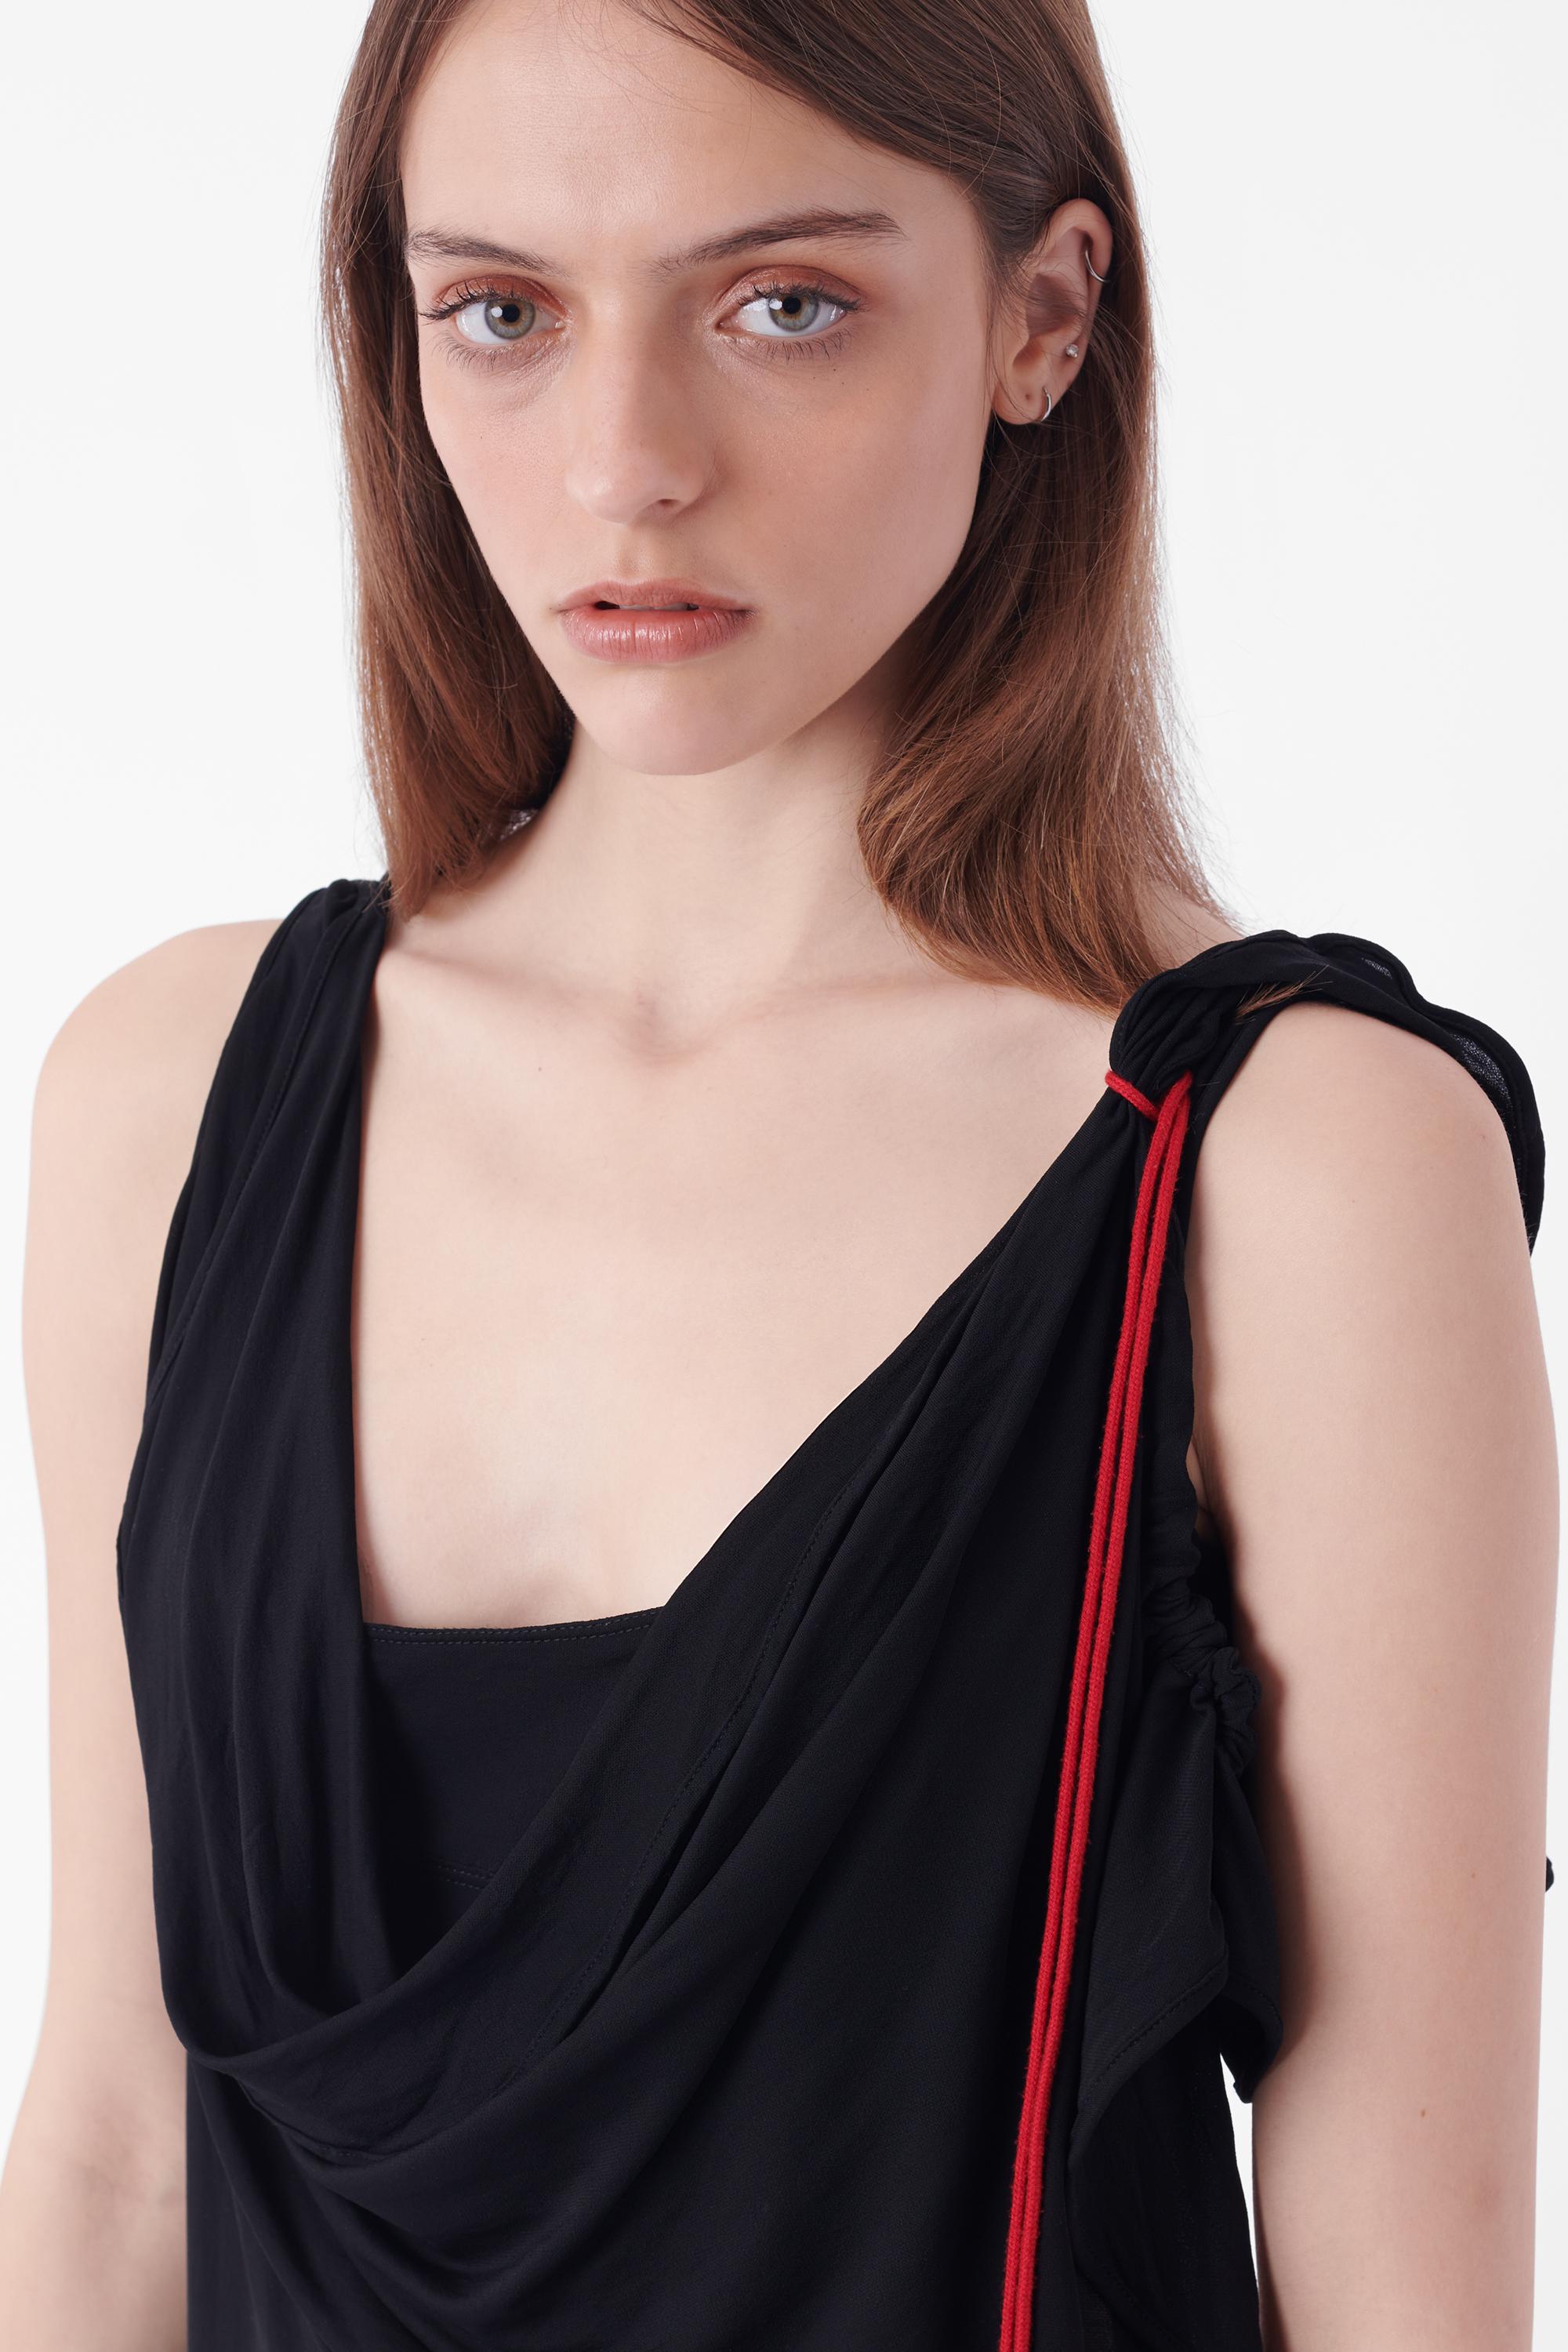 Vivienne Westwood S/S 2020 Runway Backless Black Dress In Excellent Condition For Sale In London, GB